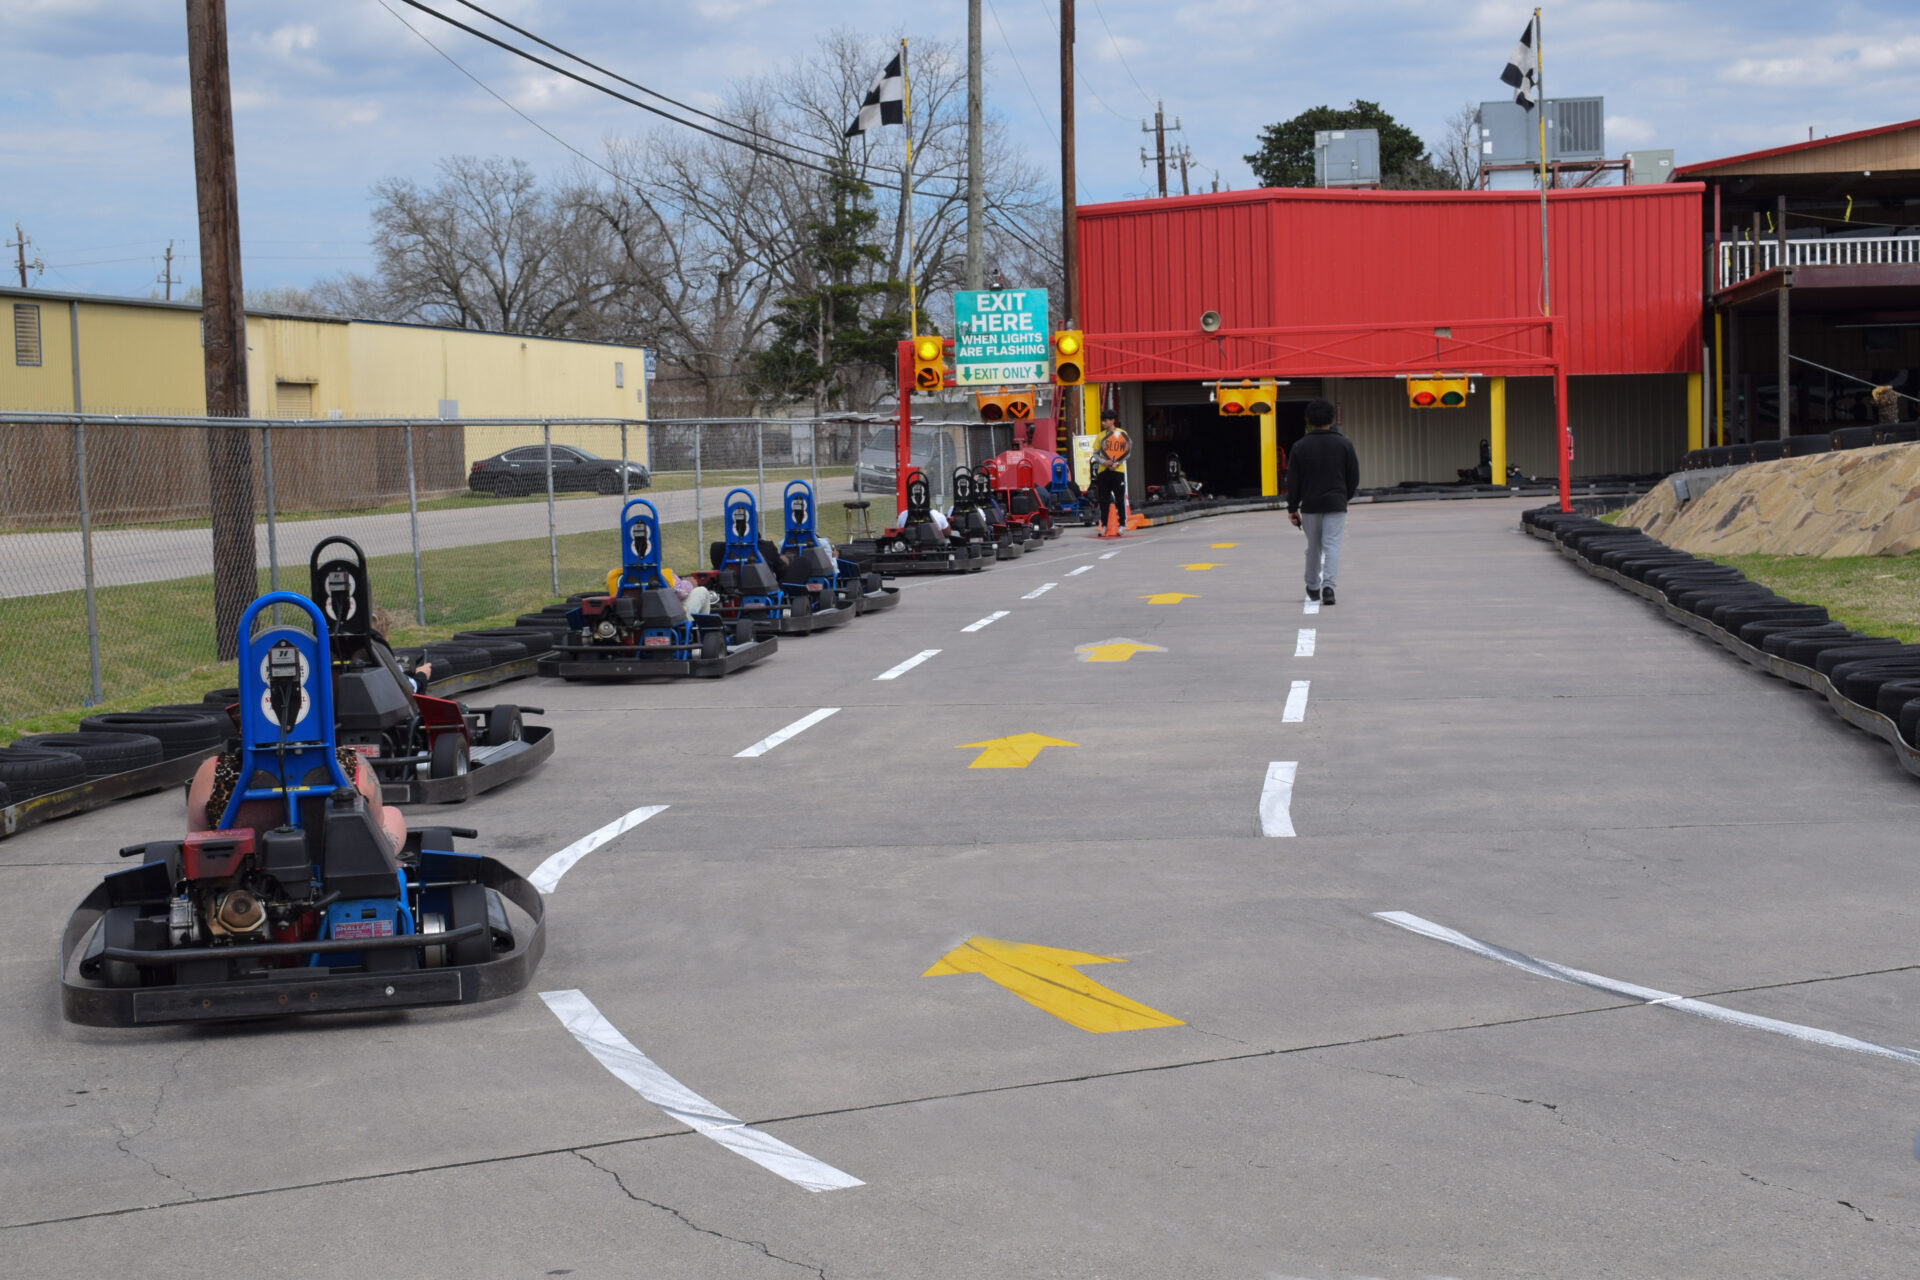 View of go karts exiting the track one after the other